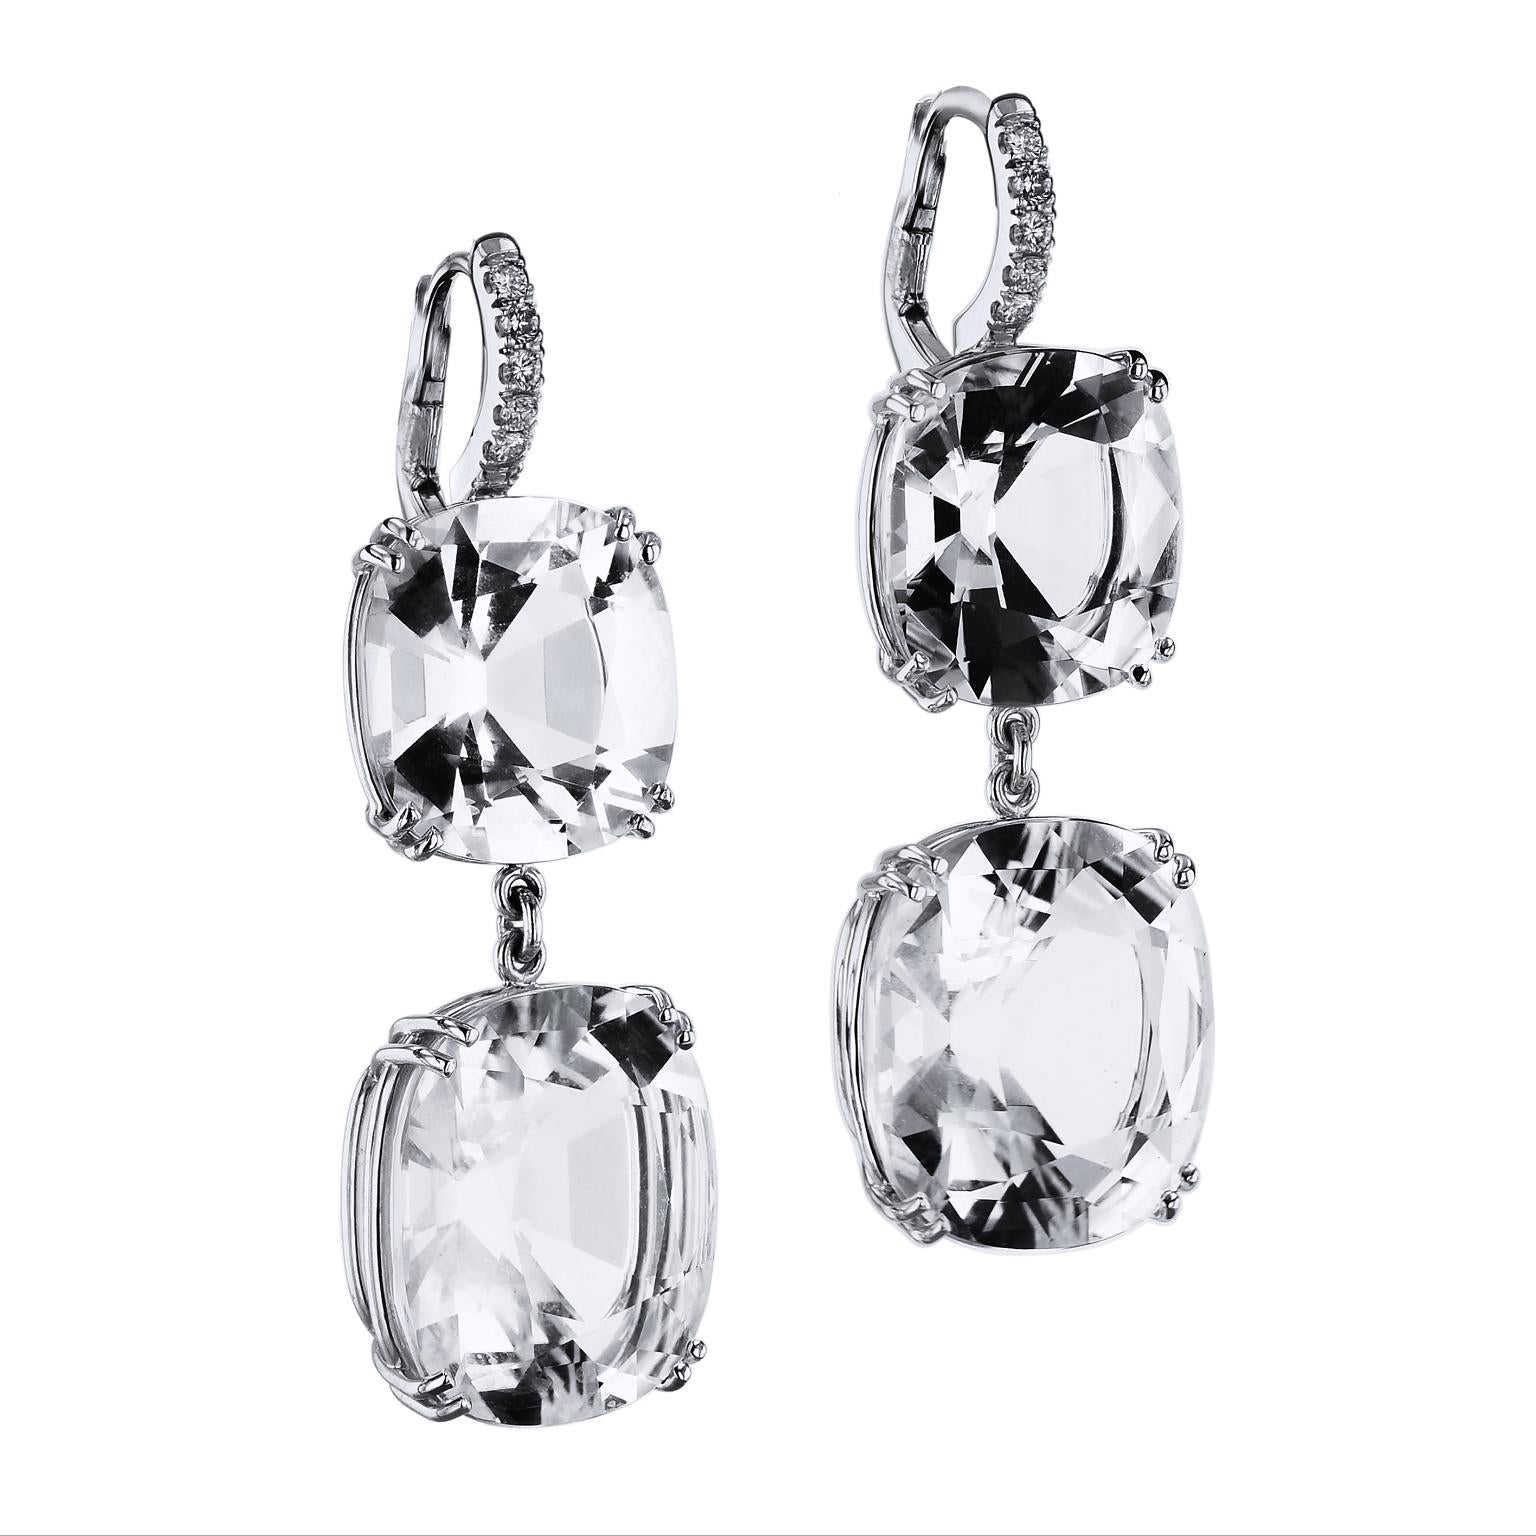 42.83 carats of Arkansas Quartz with Pave Diamonds 18 karat White Gold Earrings

Blind the crowd with the sparkle of these H&H Jewels handmade, one of a kind, 18 karat white gold cushion cut Arkansas Quartz earrings.
These stunning earrings have a